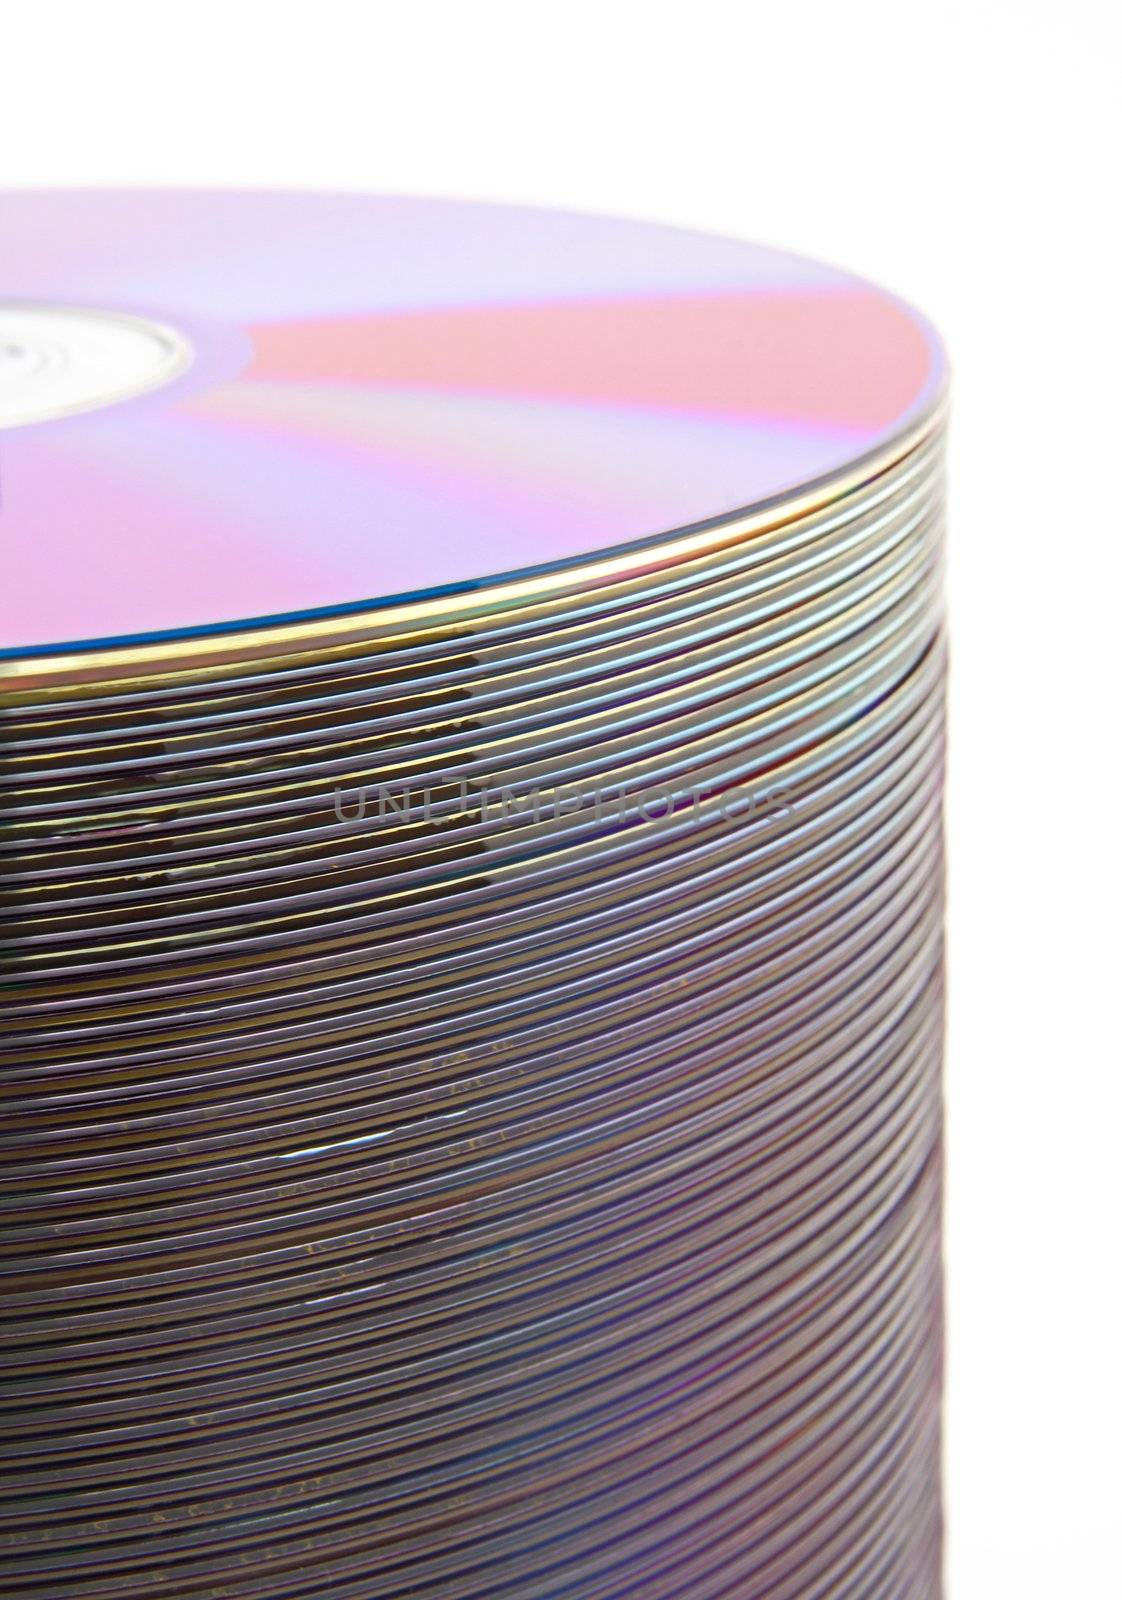 Purple CDs or DVDs on spindle, on white background, shallow DOF.